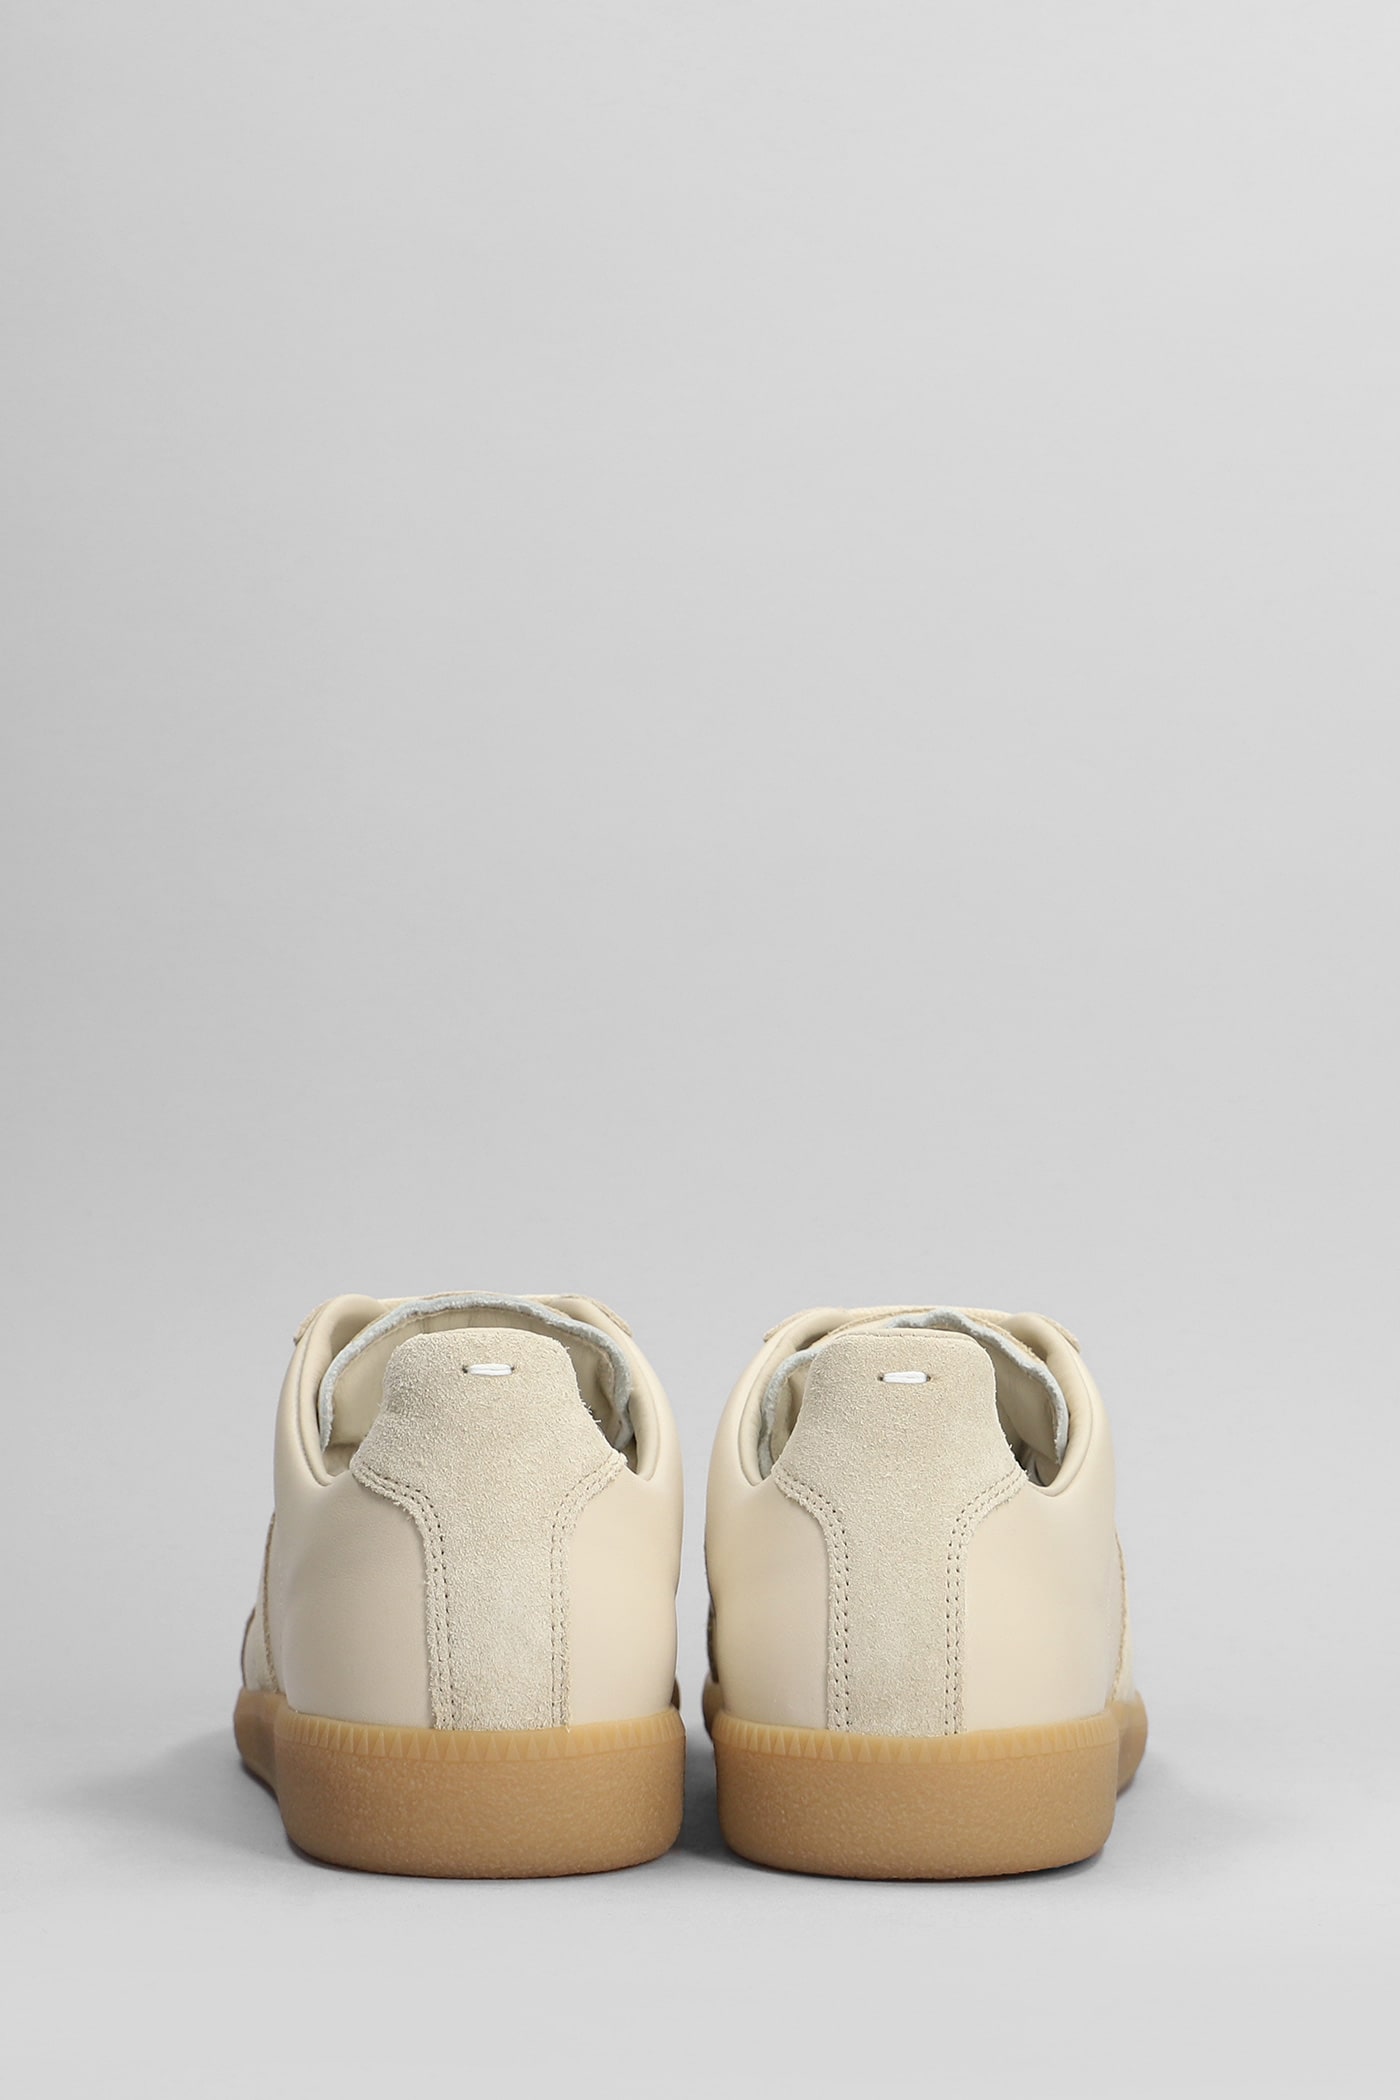 Shop Maison Margiela Replica Sneakers In Beige Suede And Leather